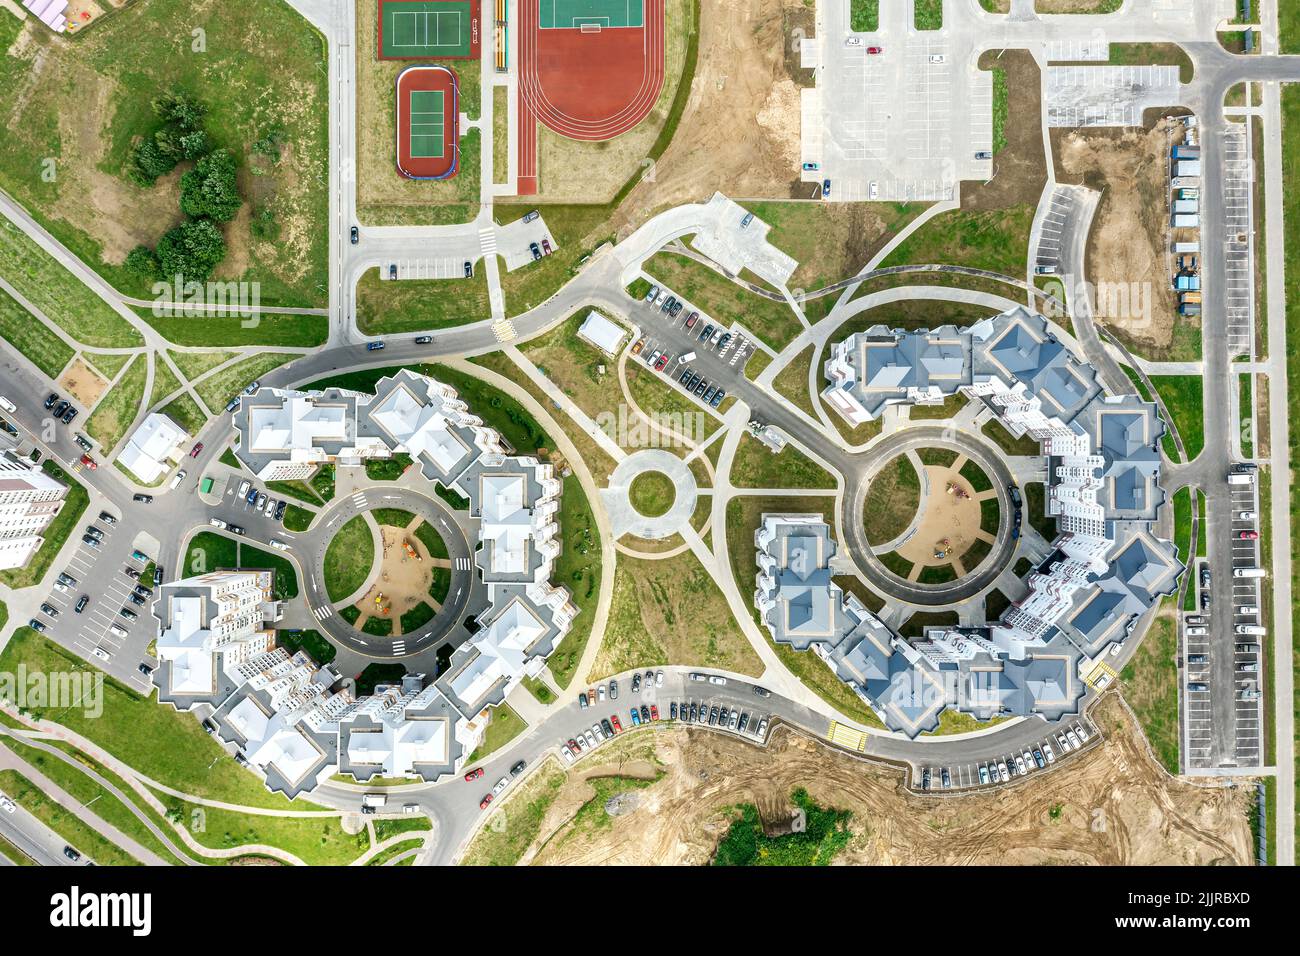 residential area with apartment buildings, parking lots, cars, playgrounds. modern urban architecture. aerial top view. Stock Photo